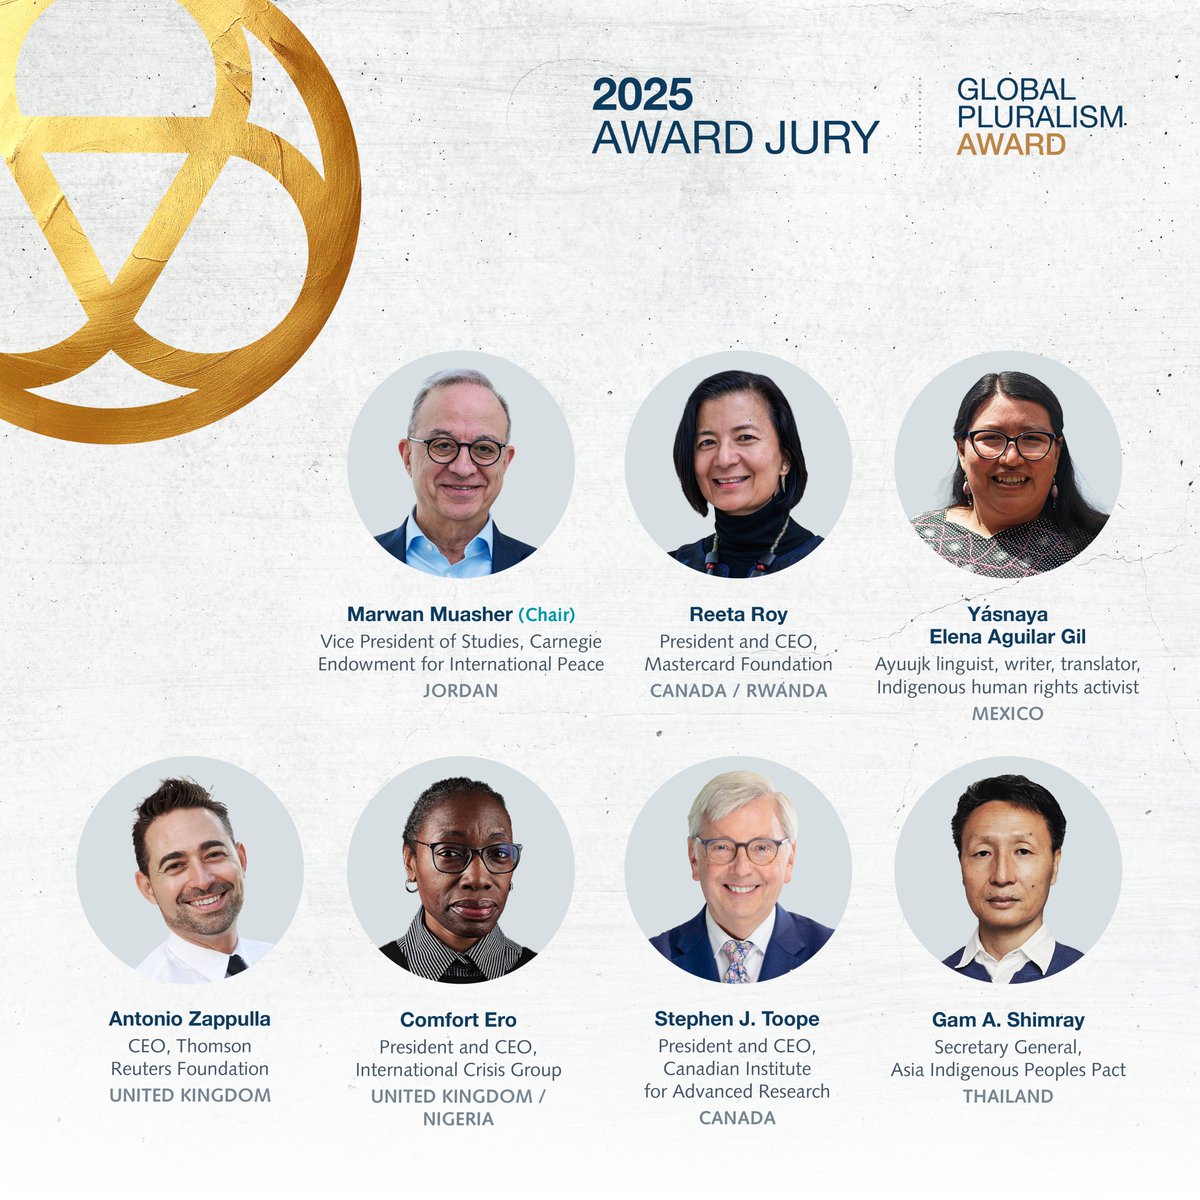 The #GlobalPluralismAward celebrates the inspiring work that is helping to build more inclusive societies.

With thanks to @GlobalPluralism, I'm thrilled to be a part of the 2025 Award Jury – recognising those driving pluralism in action around the world: award.pluralism.ca